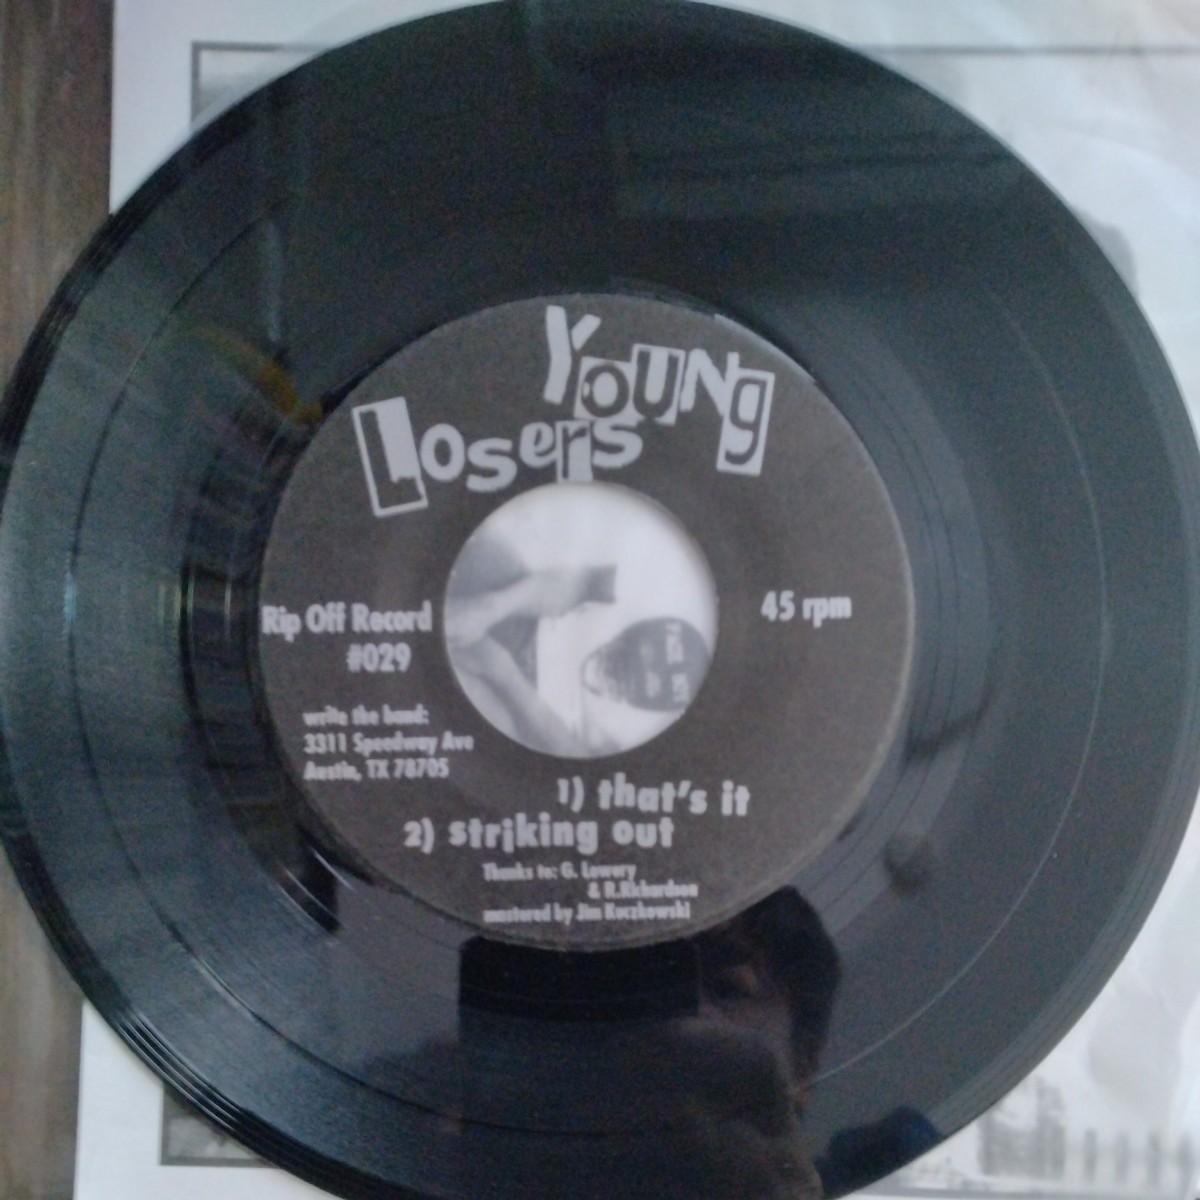 EP YOUNG LOSERS [that‘s it] RIP OFF RECORDS ガレージパンク_画像2